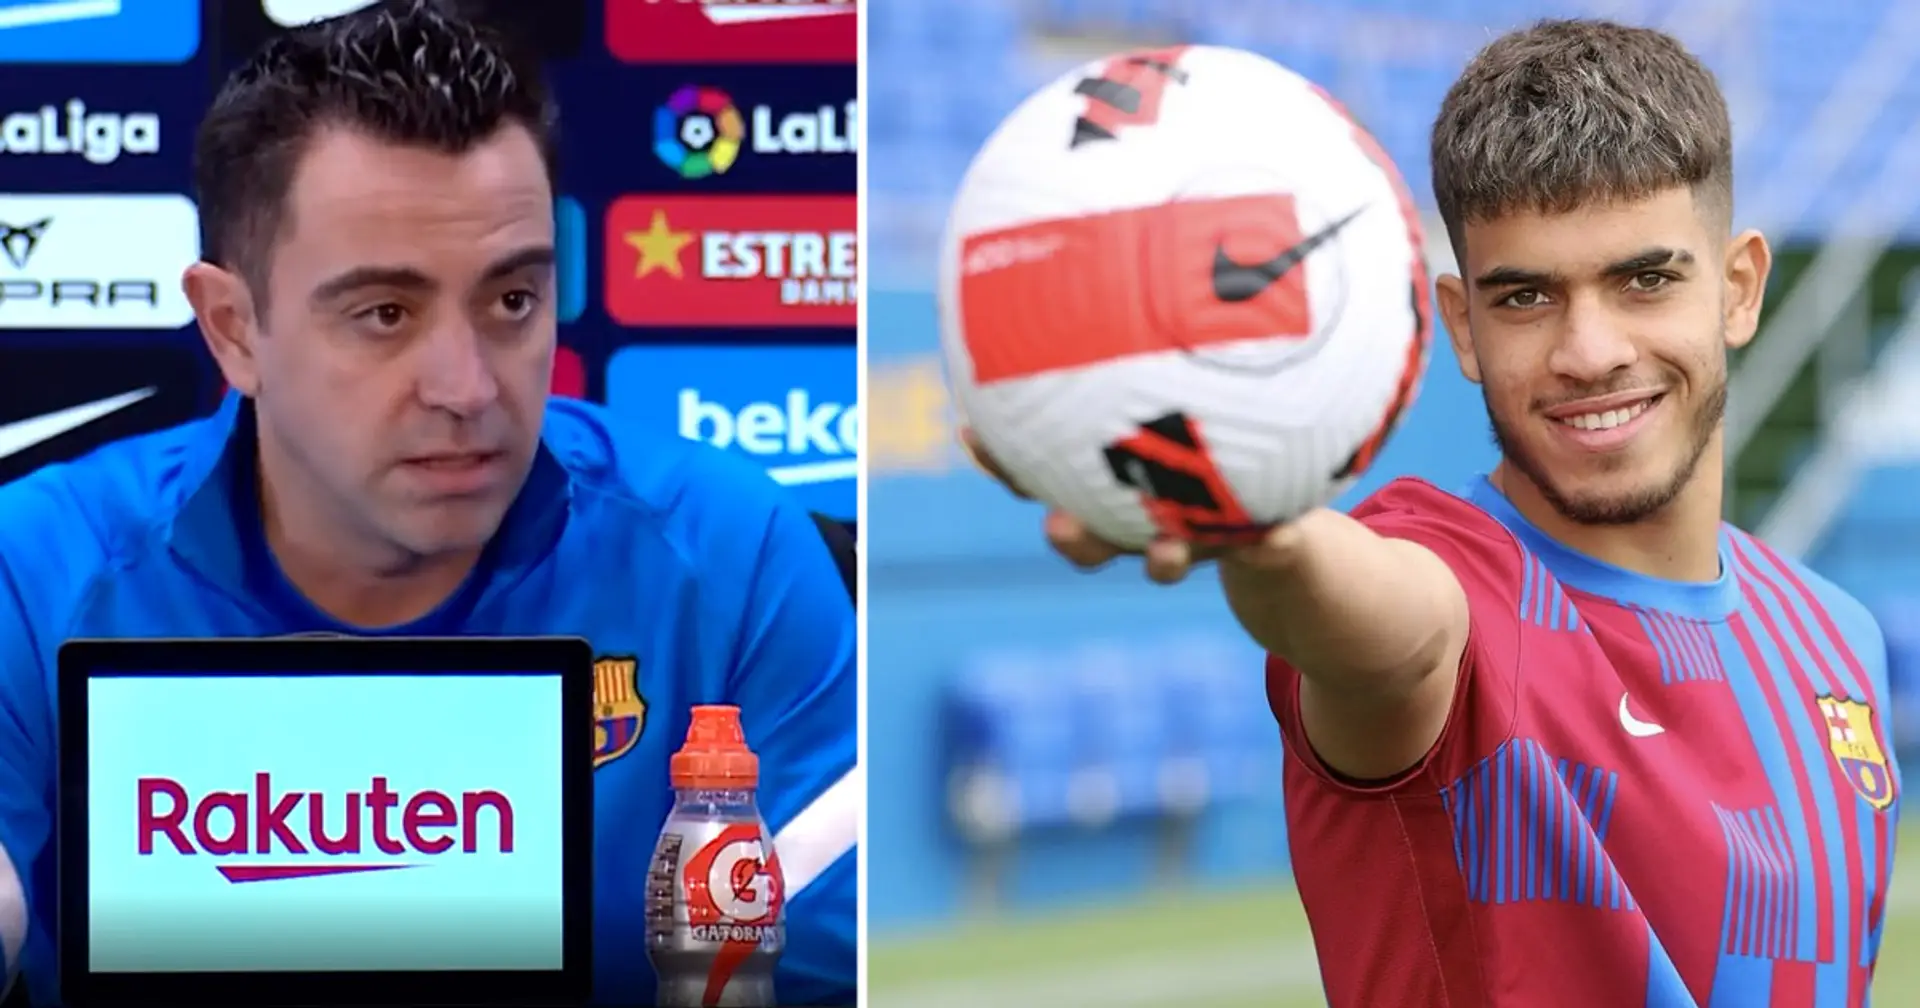 'There may be surprises': Xavi on what players he will use against Espanyol